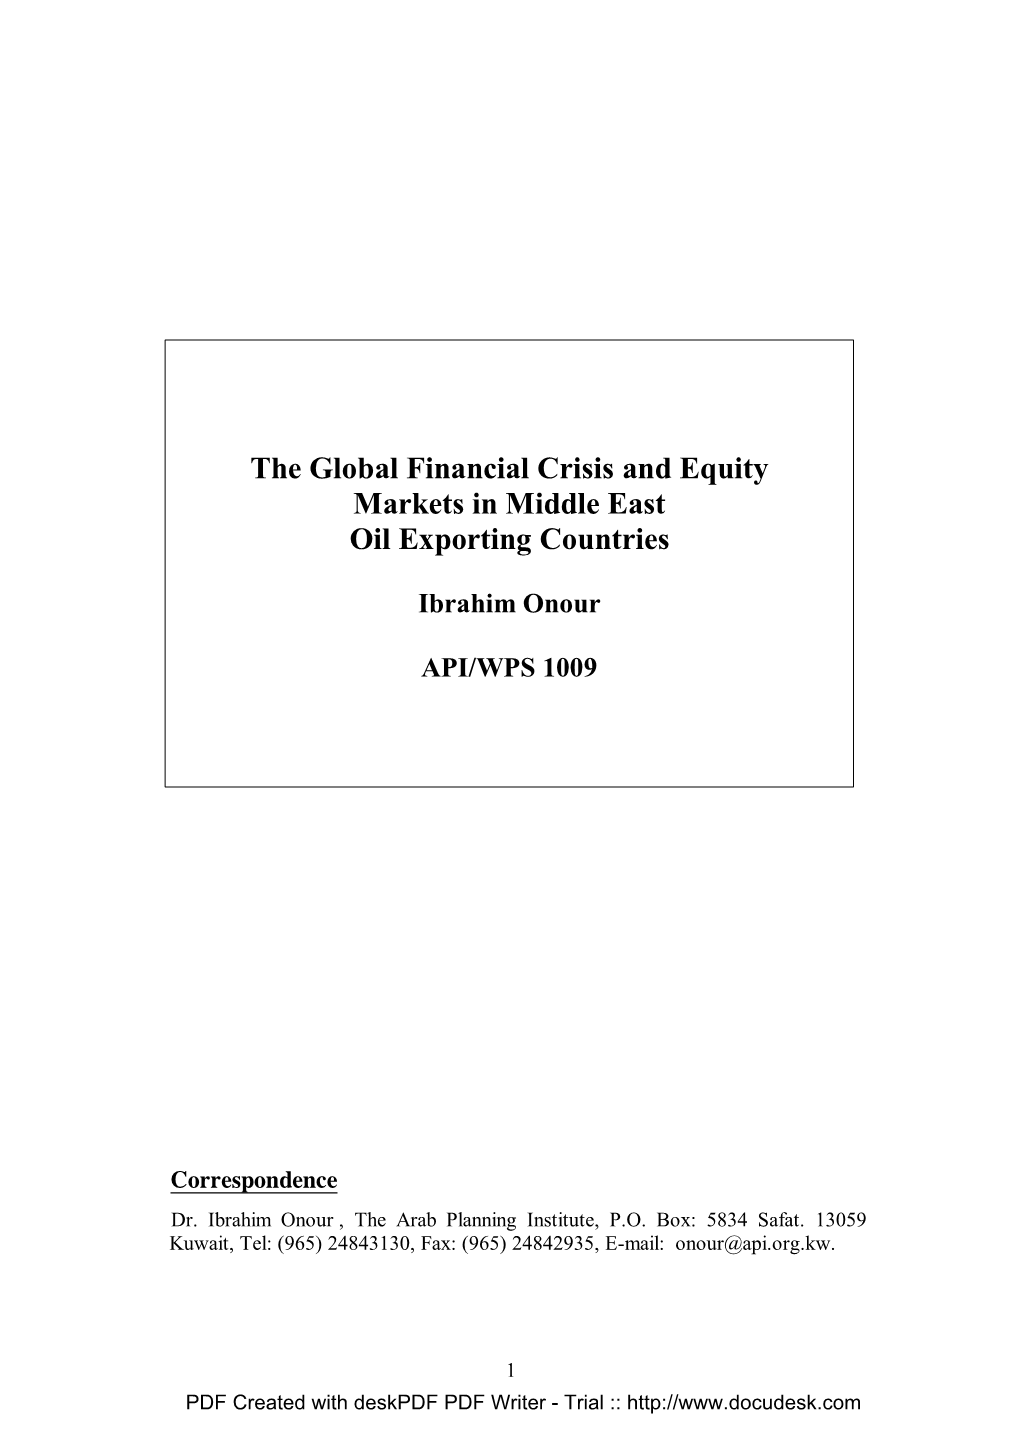 The Global Financial Crisis and Equity Markets in Middle East Oil Exporting Countries